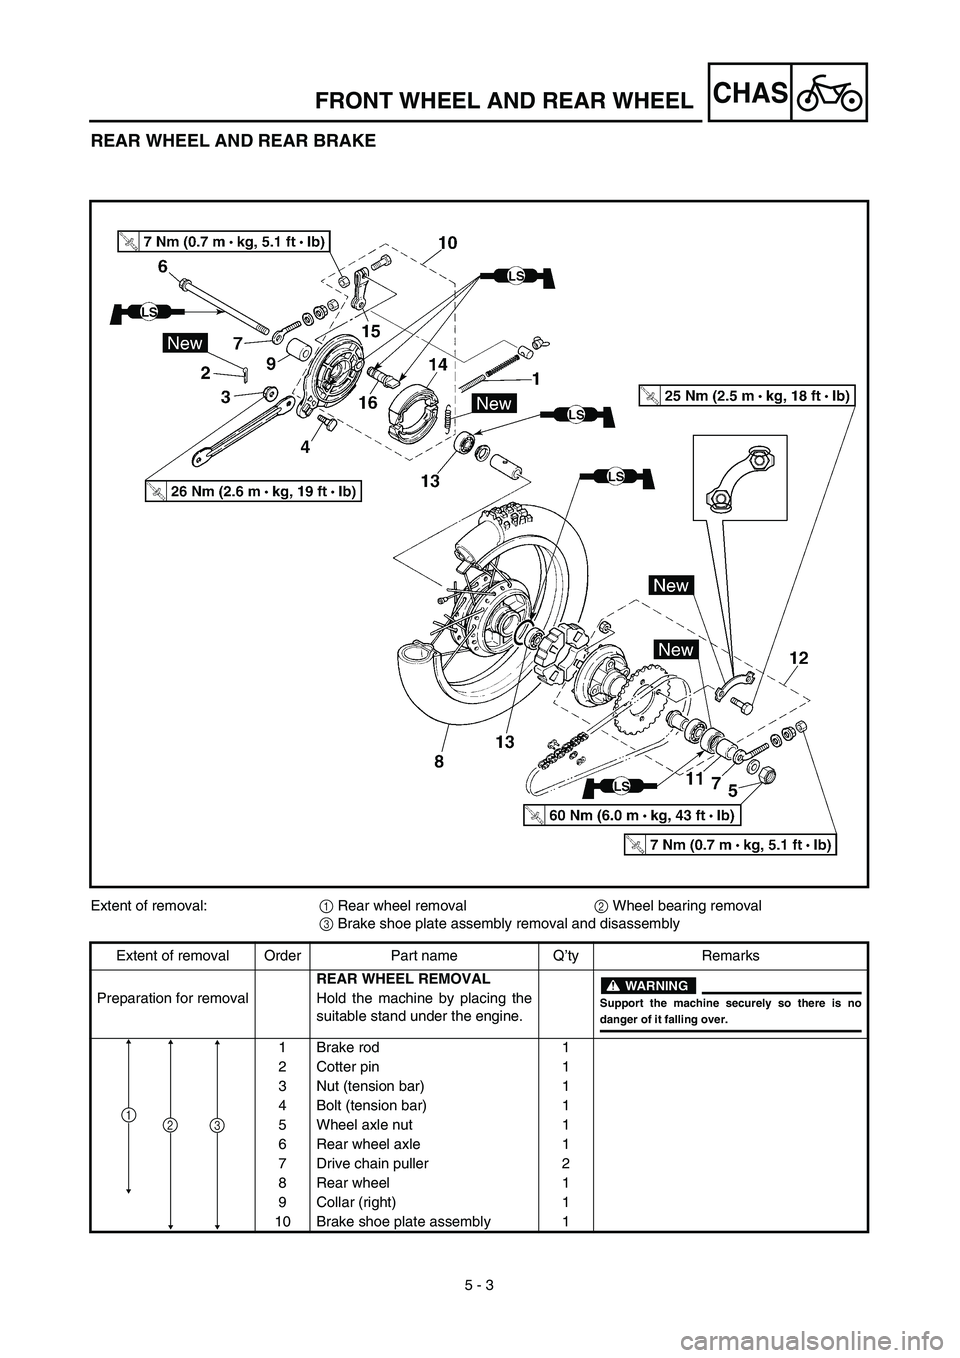 YAMAHA TTR90 2003  Owners Manual  
5 - 3
CHAS
 
FRONT WHEEL AND REAR WHEEL 
REAR WHEEL AND REAR BRAKE 
Extent of removal: 
1  
 Rear wheel removal  
2  
 Wheel bearing removal  
3  
 Brake shoe plate assembly removal and disassembly
